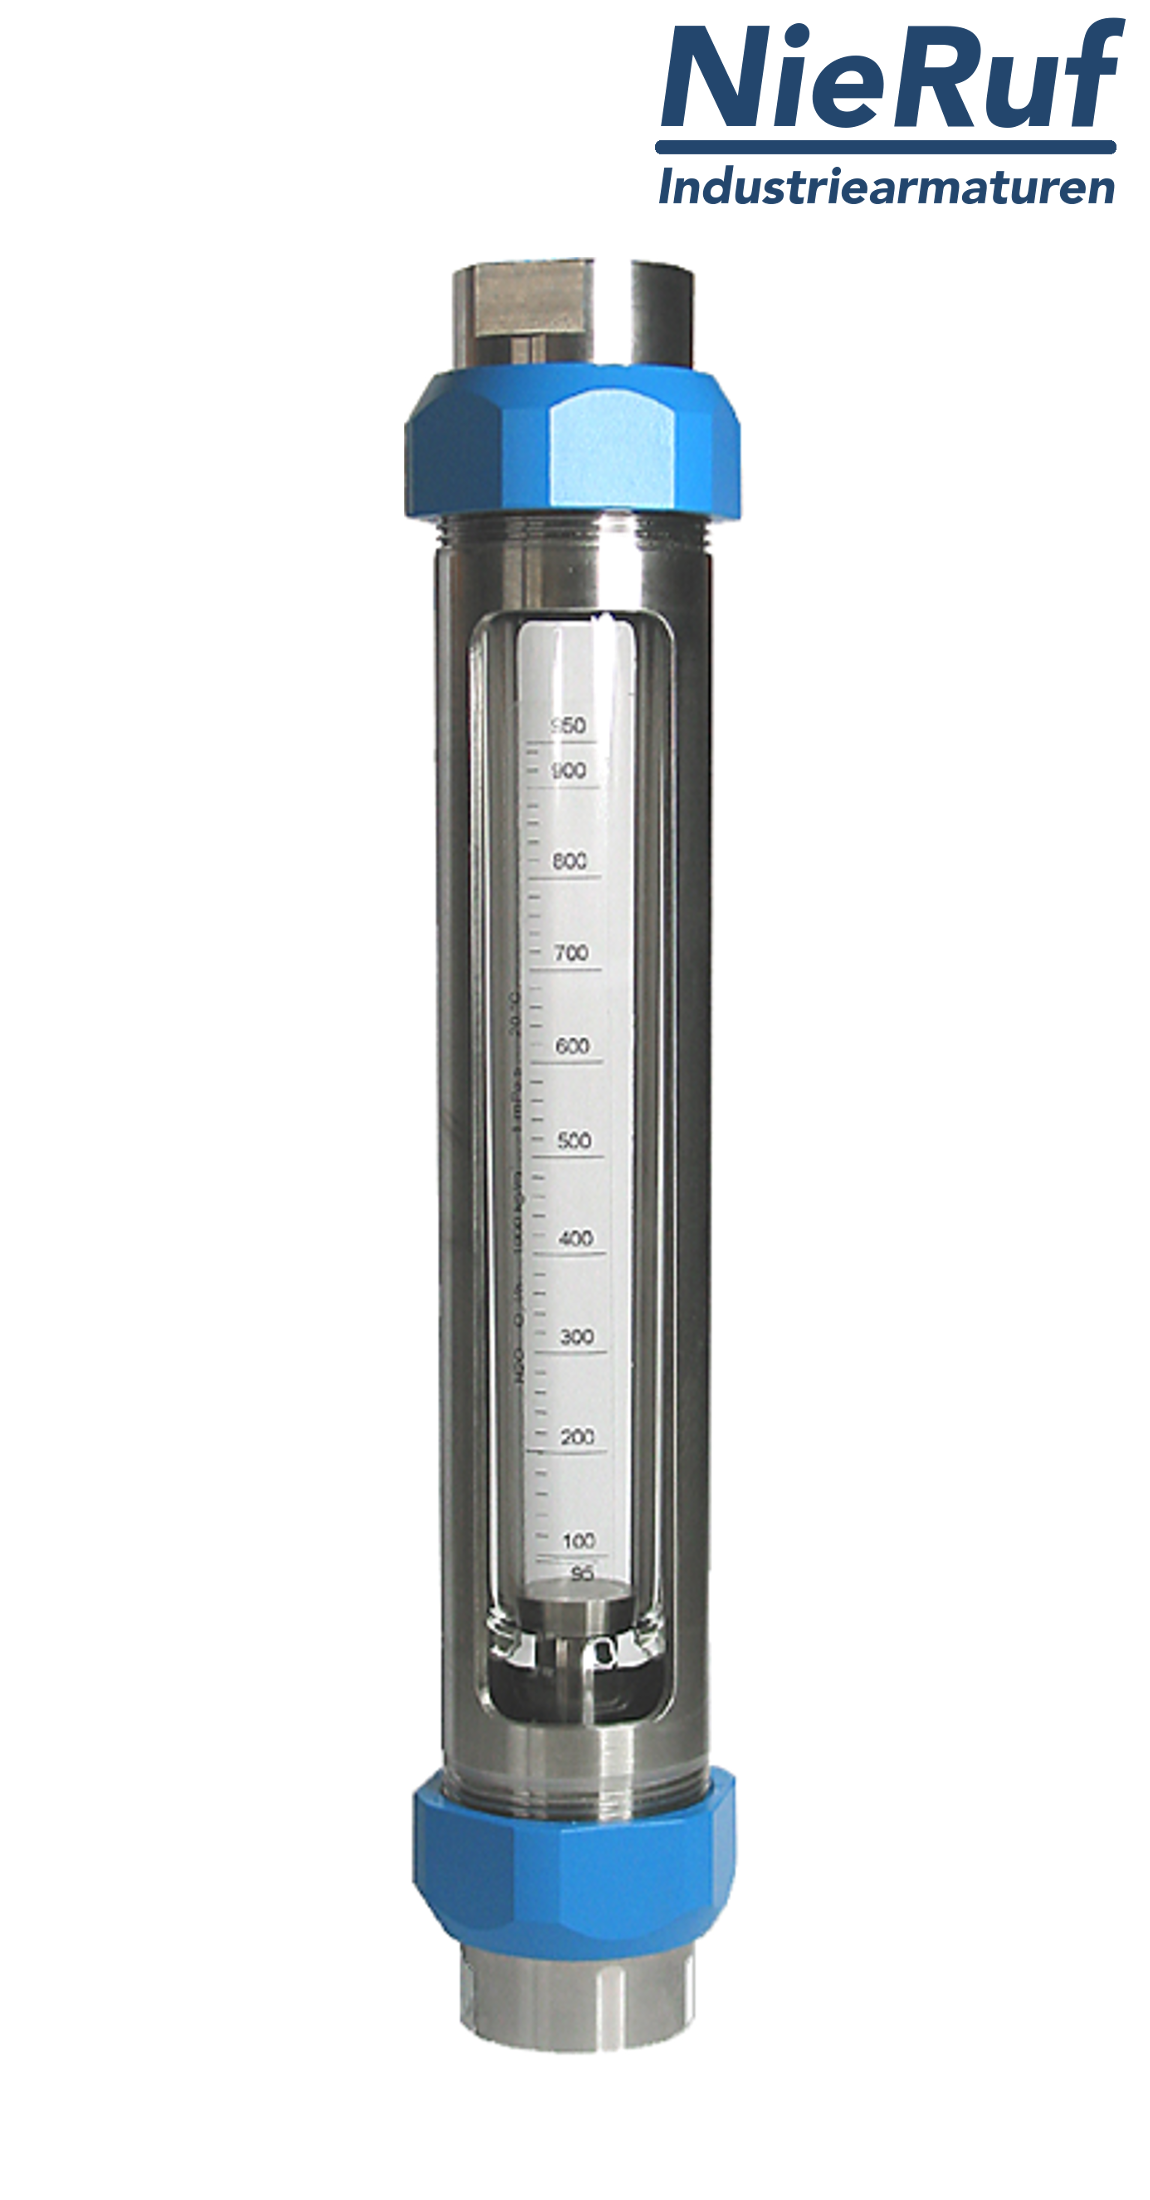 Variable area flowmeter stainless steel + borosilicate 1 1/2" inch 500.0 - 5000 l/h water FKM